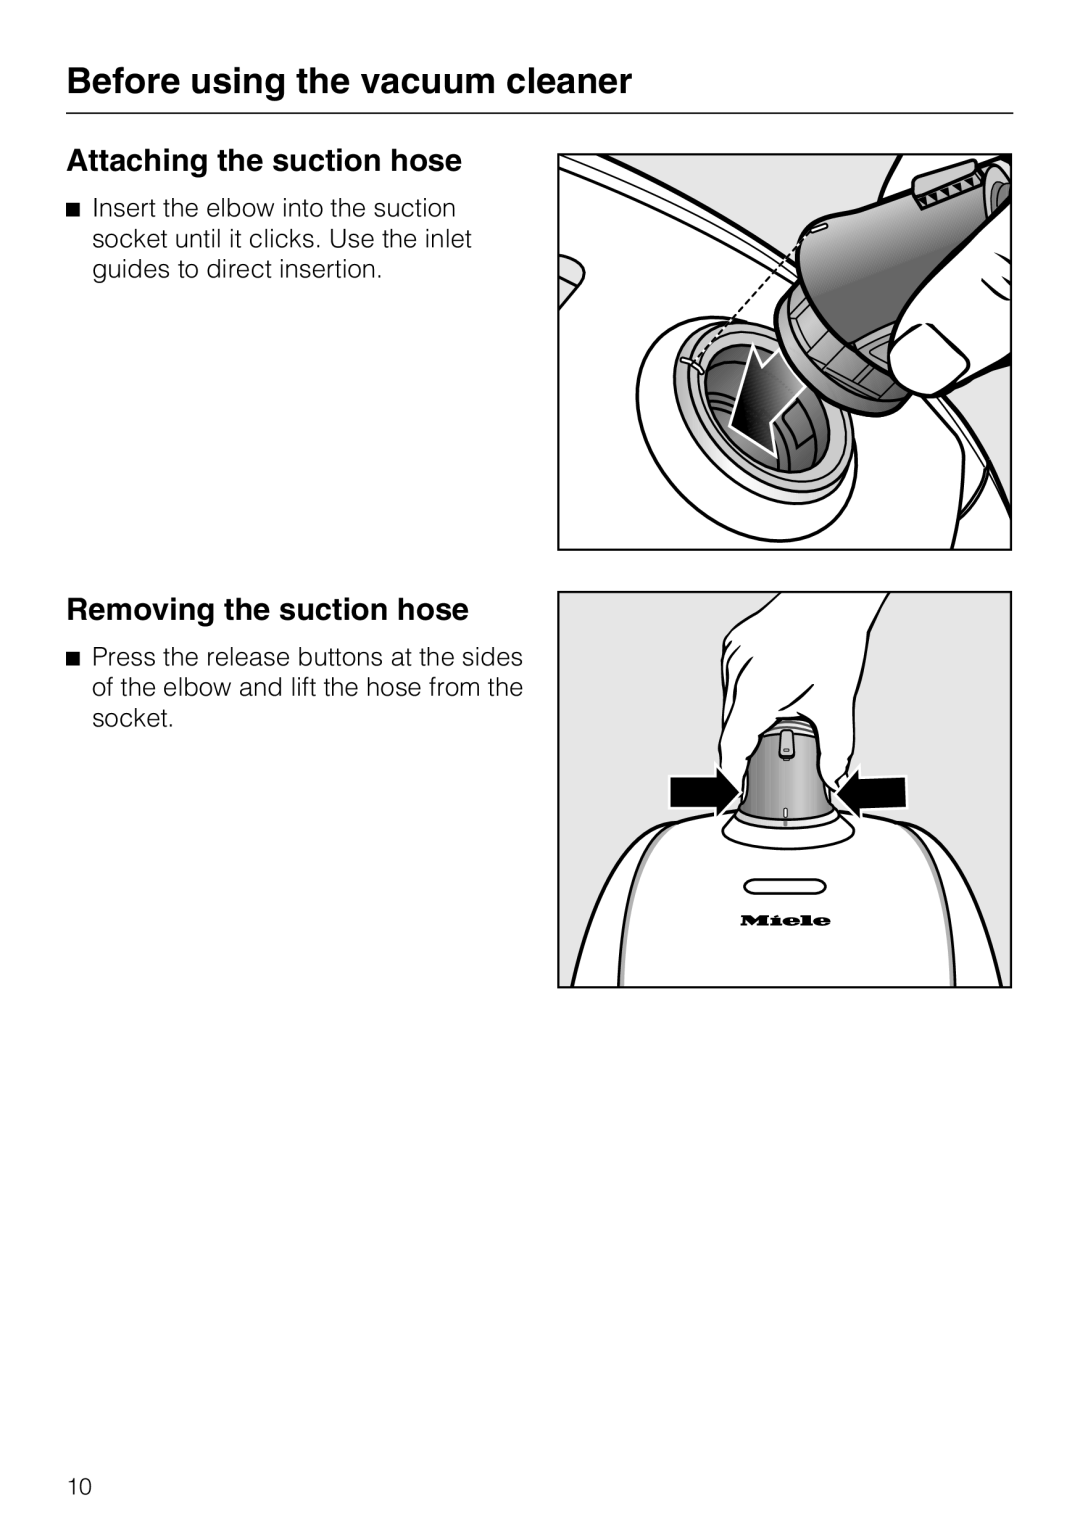 Miele S 6000 operating instructions Before using the vacuum cleaner, Attaching the suction hose, Removing the suction hose 